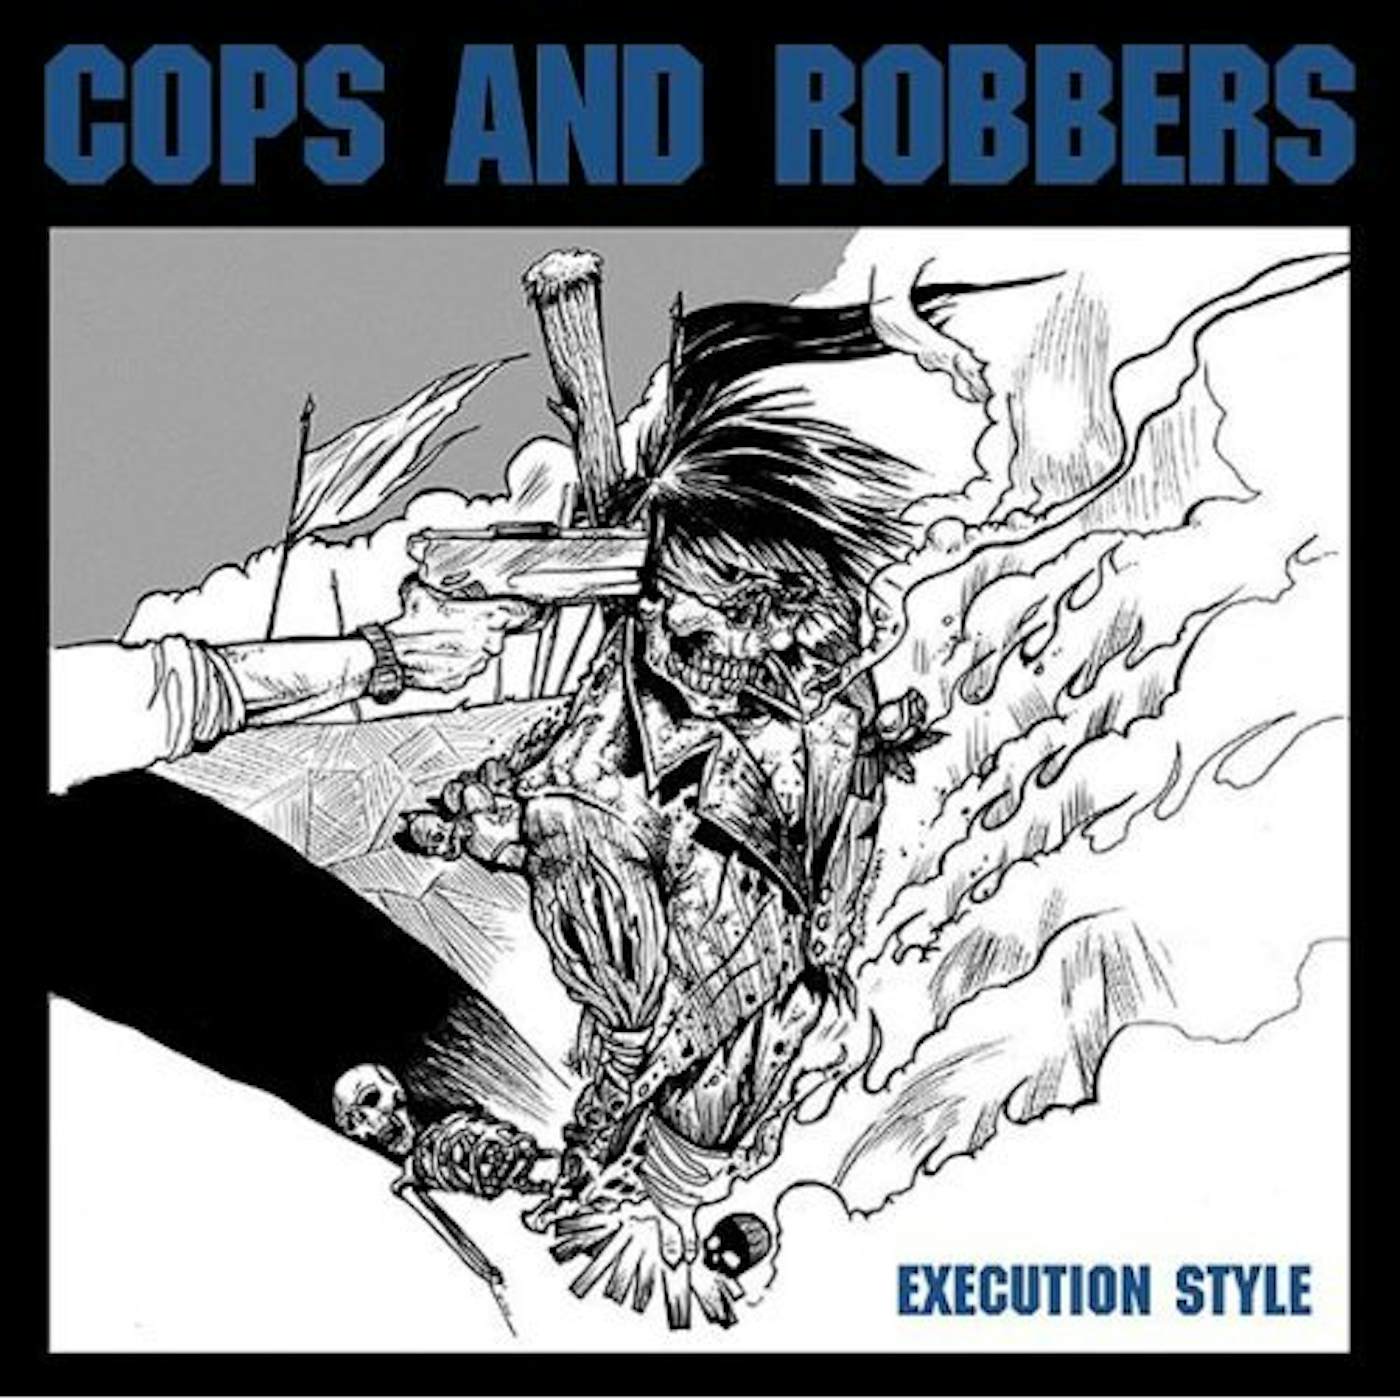 Cops & Robbers EXECUTION STYLE CD